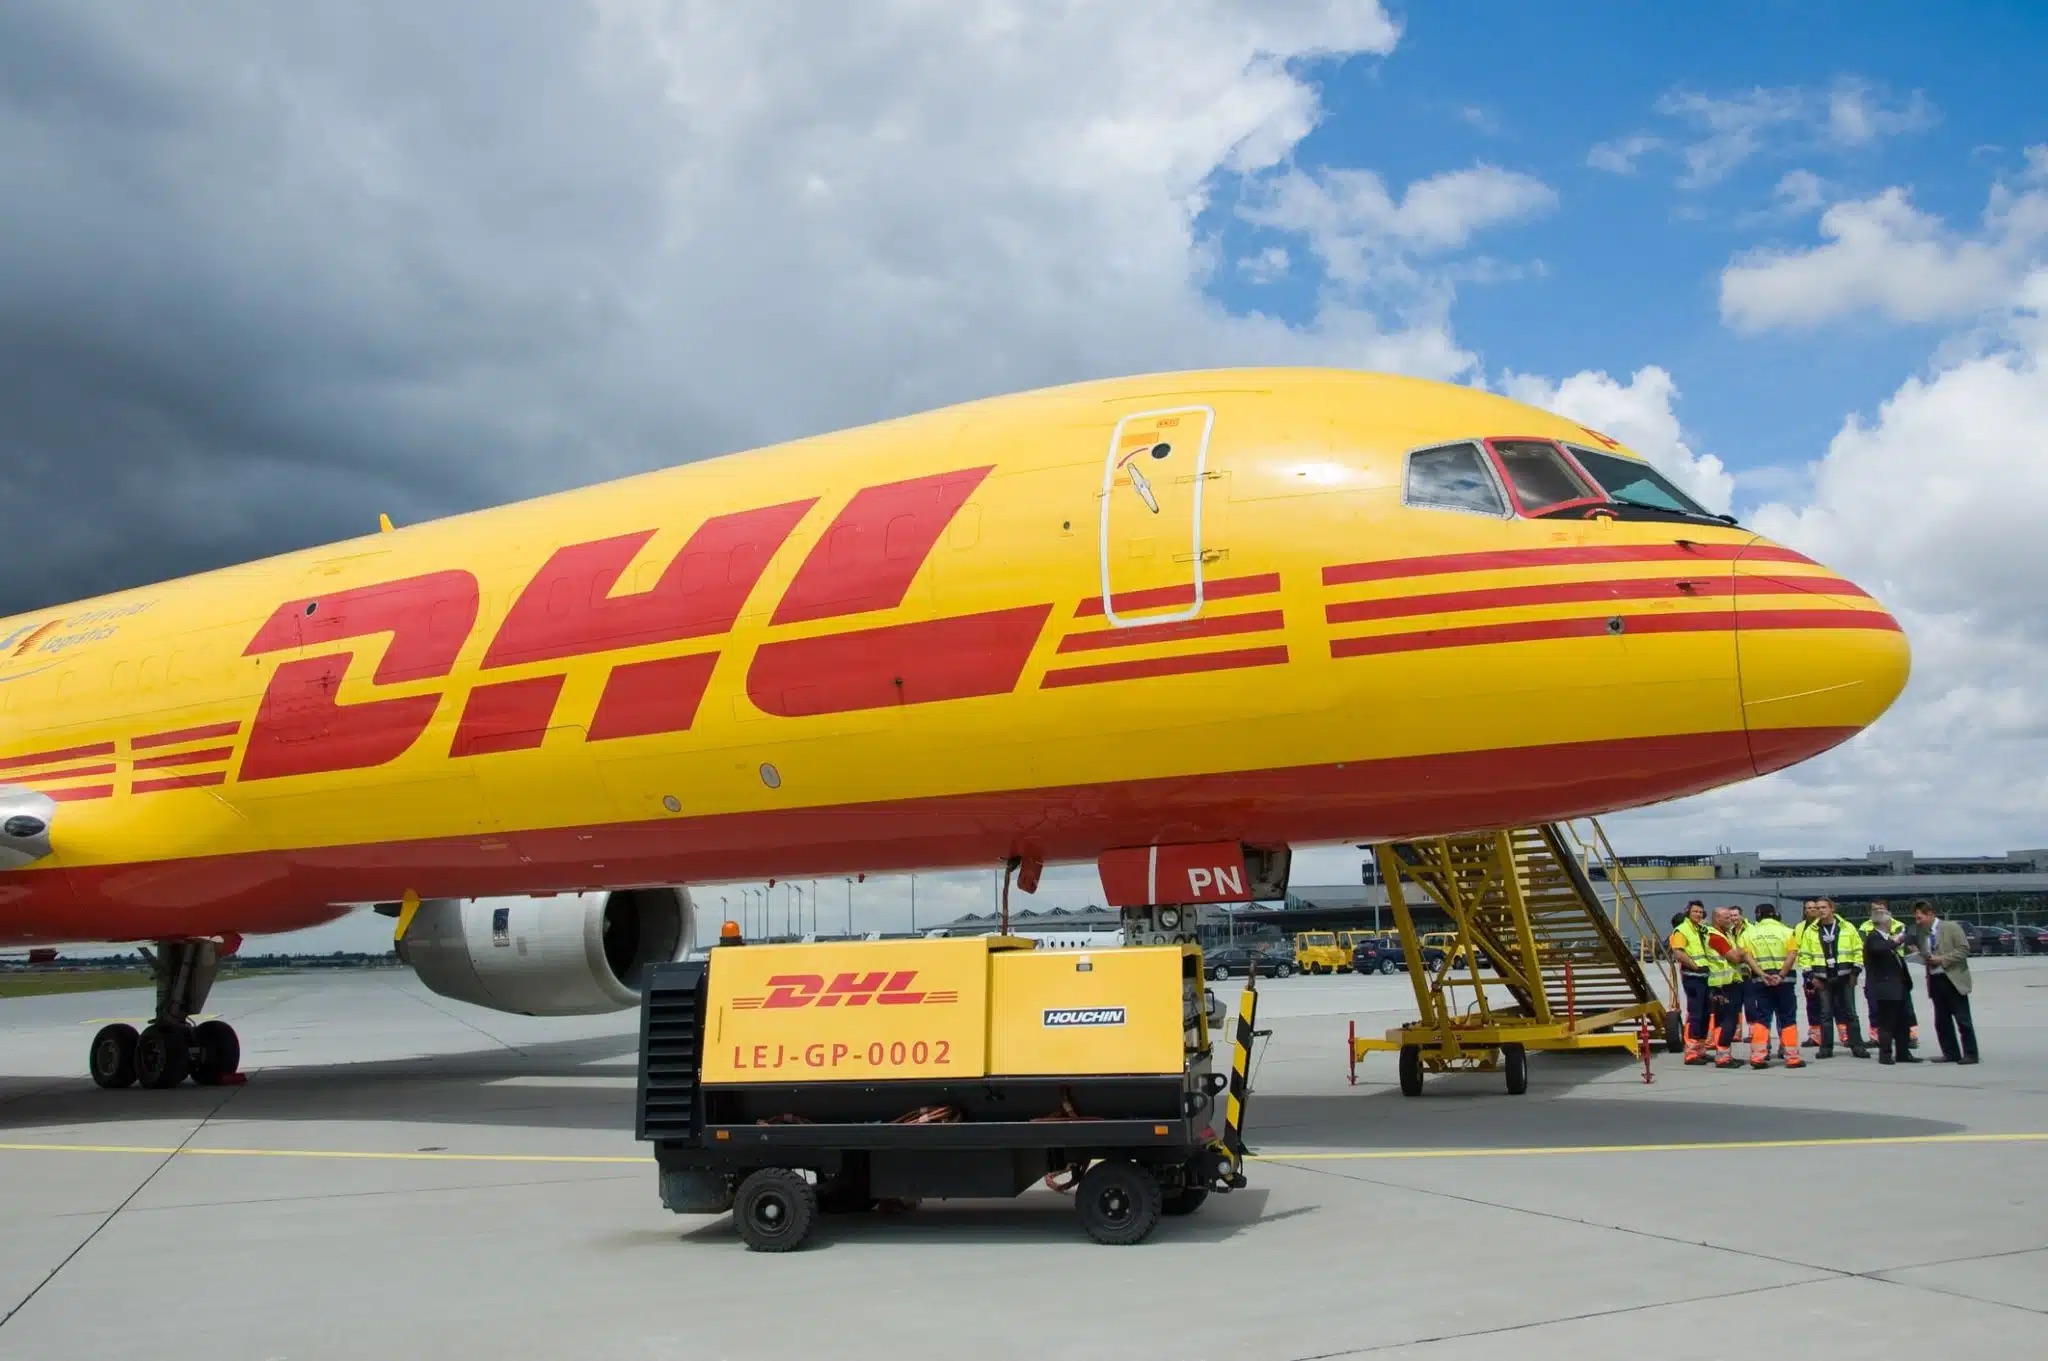 DHL Poland: DHL opens new logistics centre in Poland